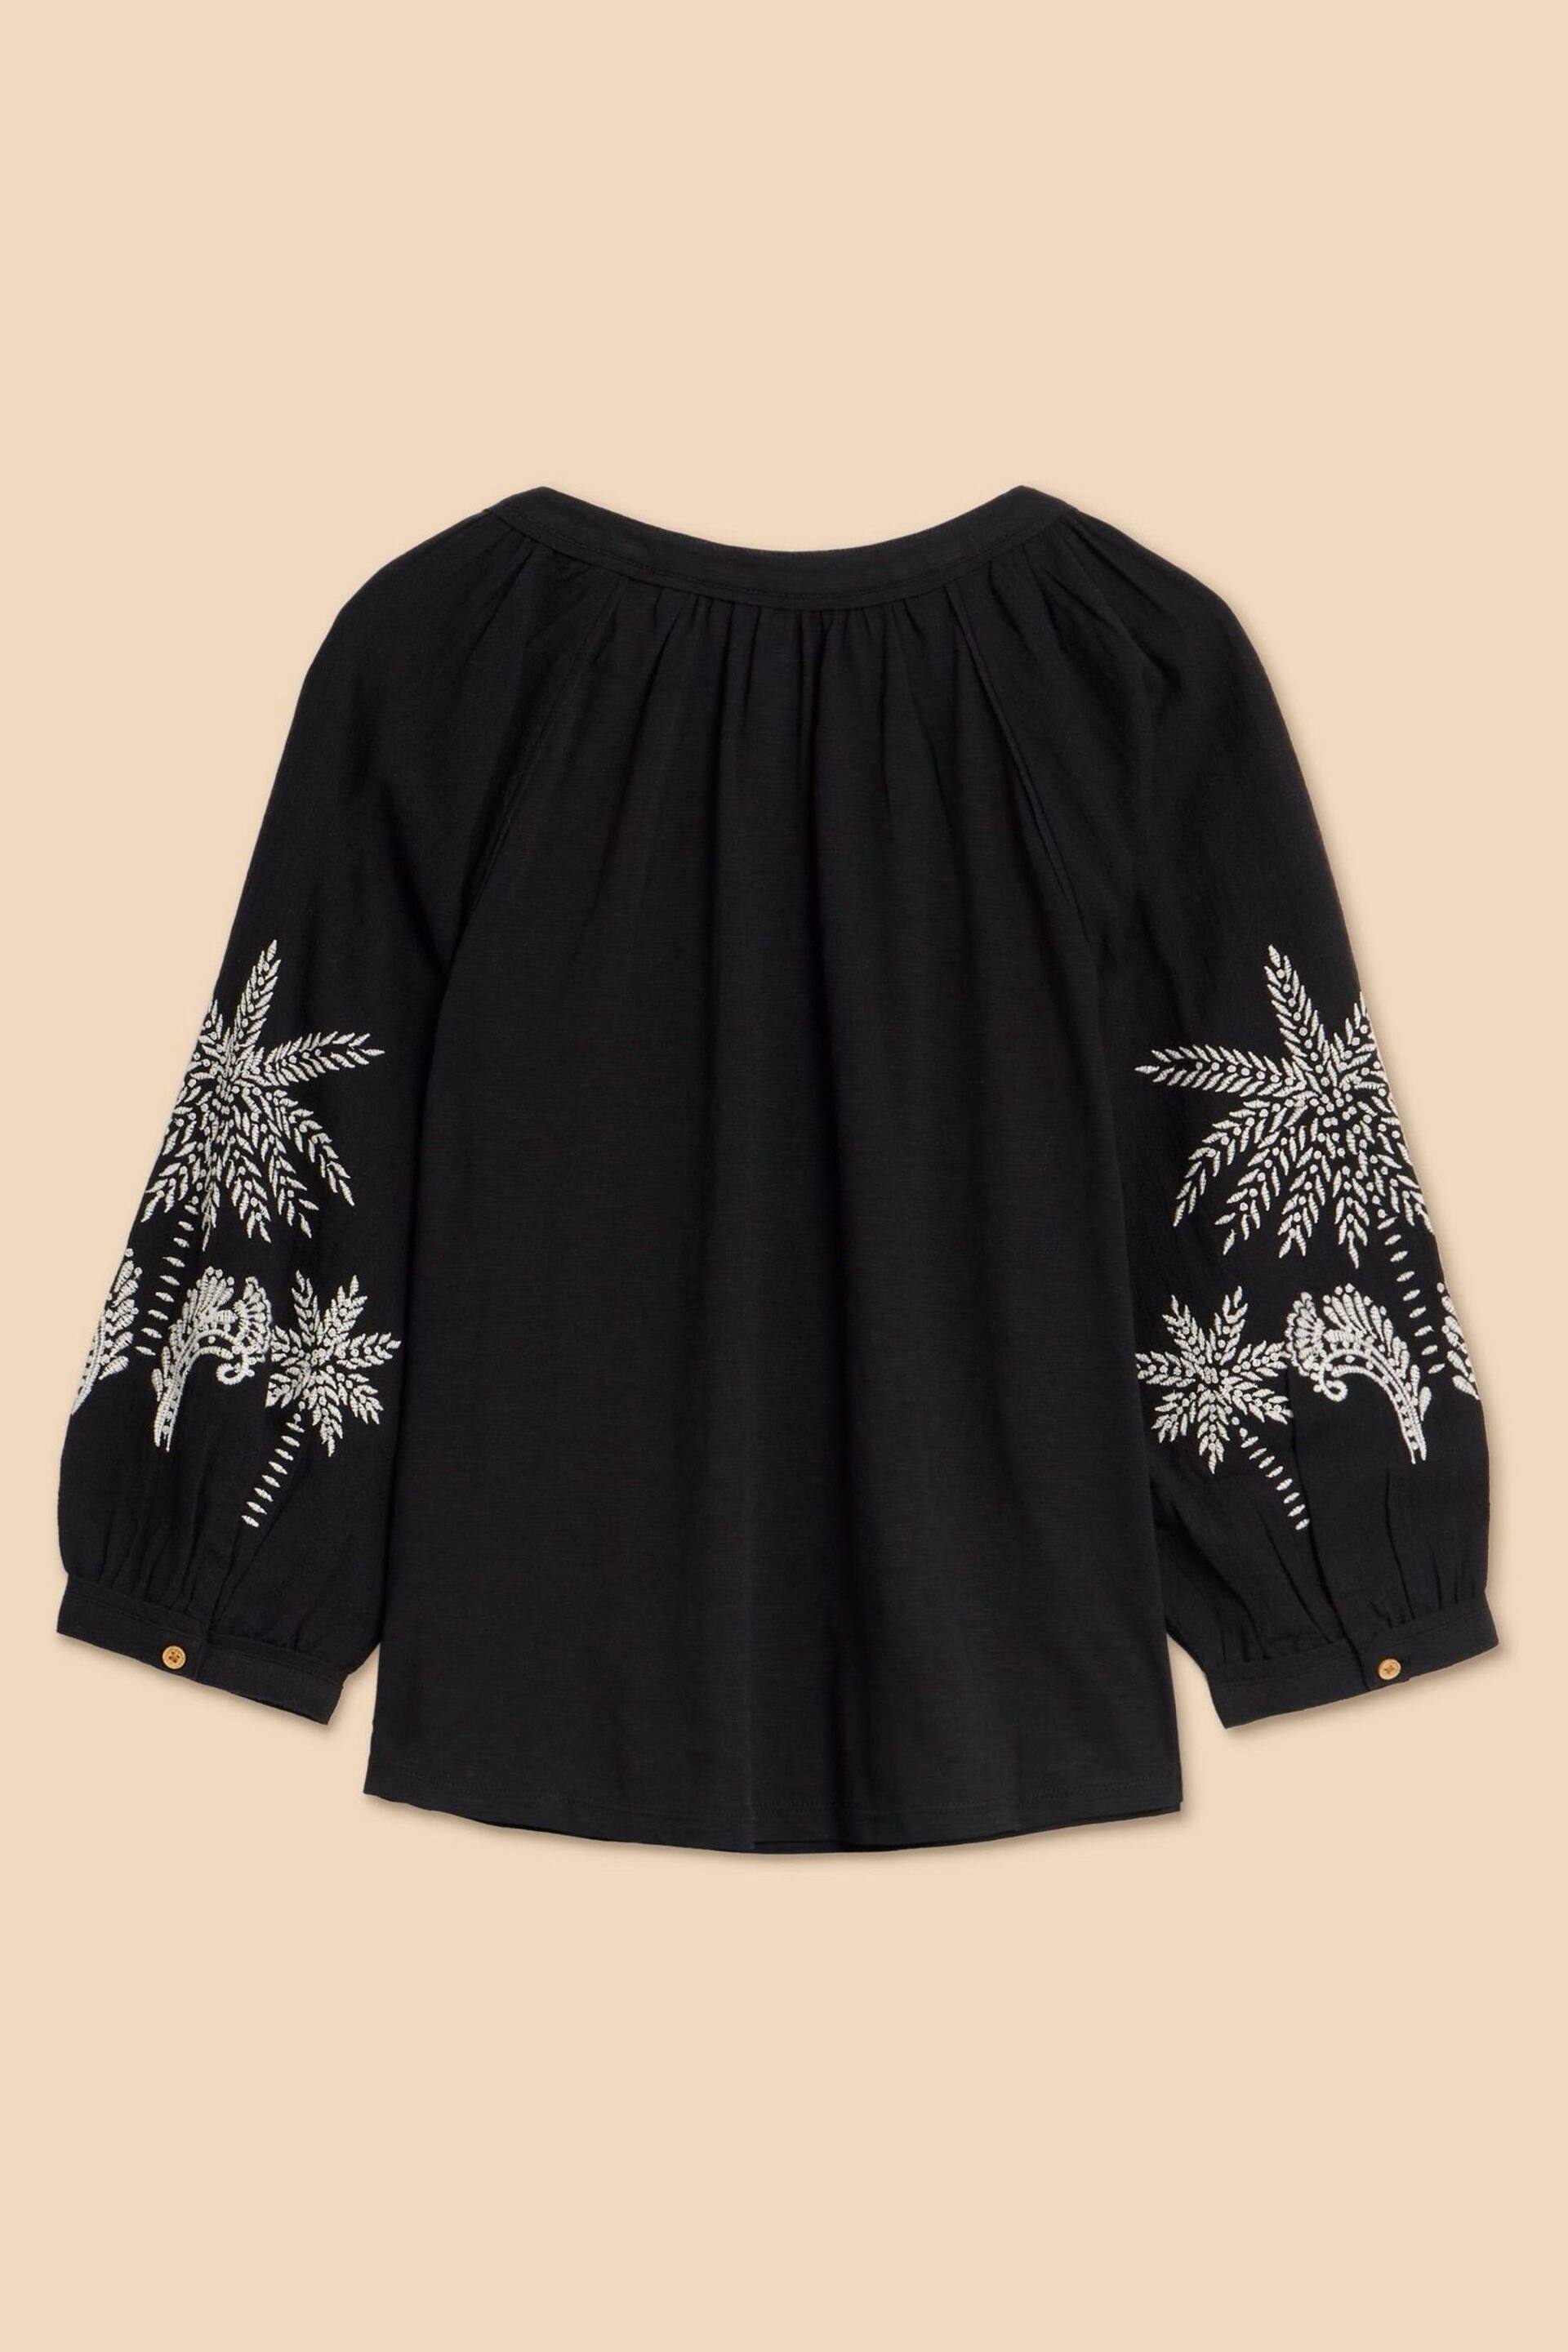 White Stuff Black Mix Embroidered Millie Top - Image 6 of 7